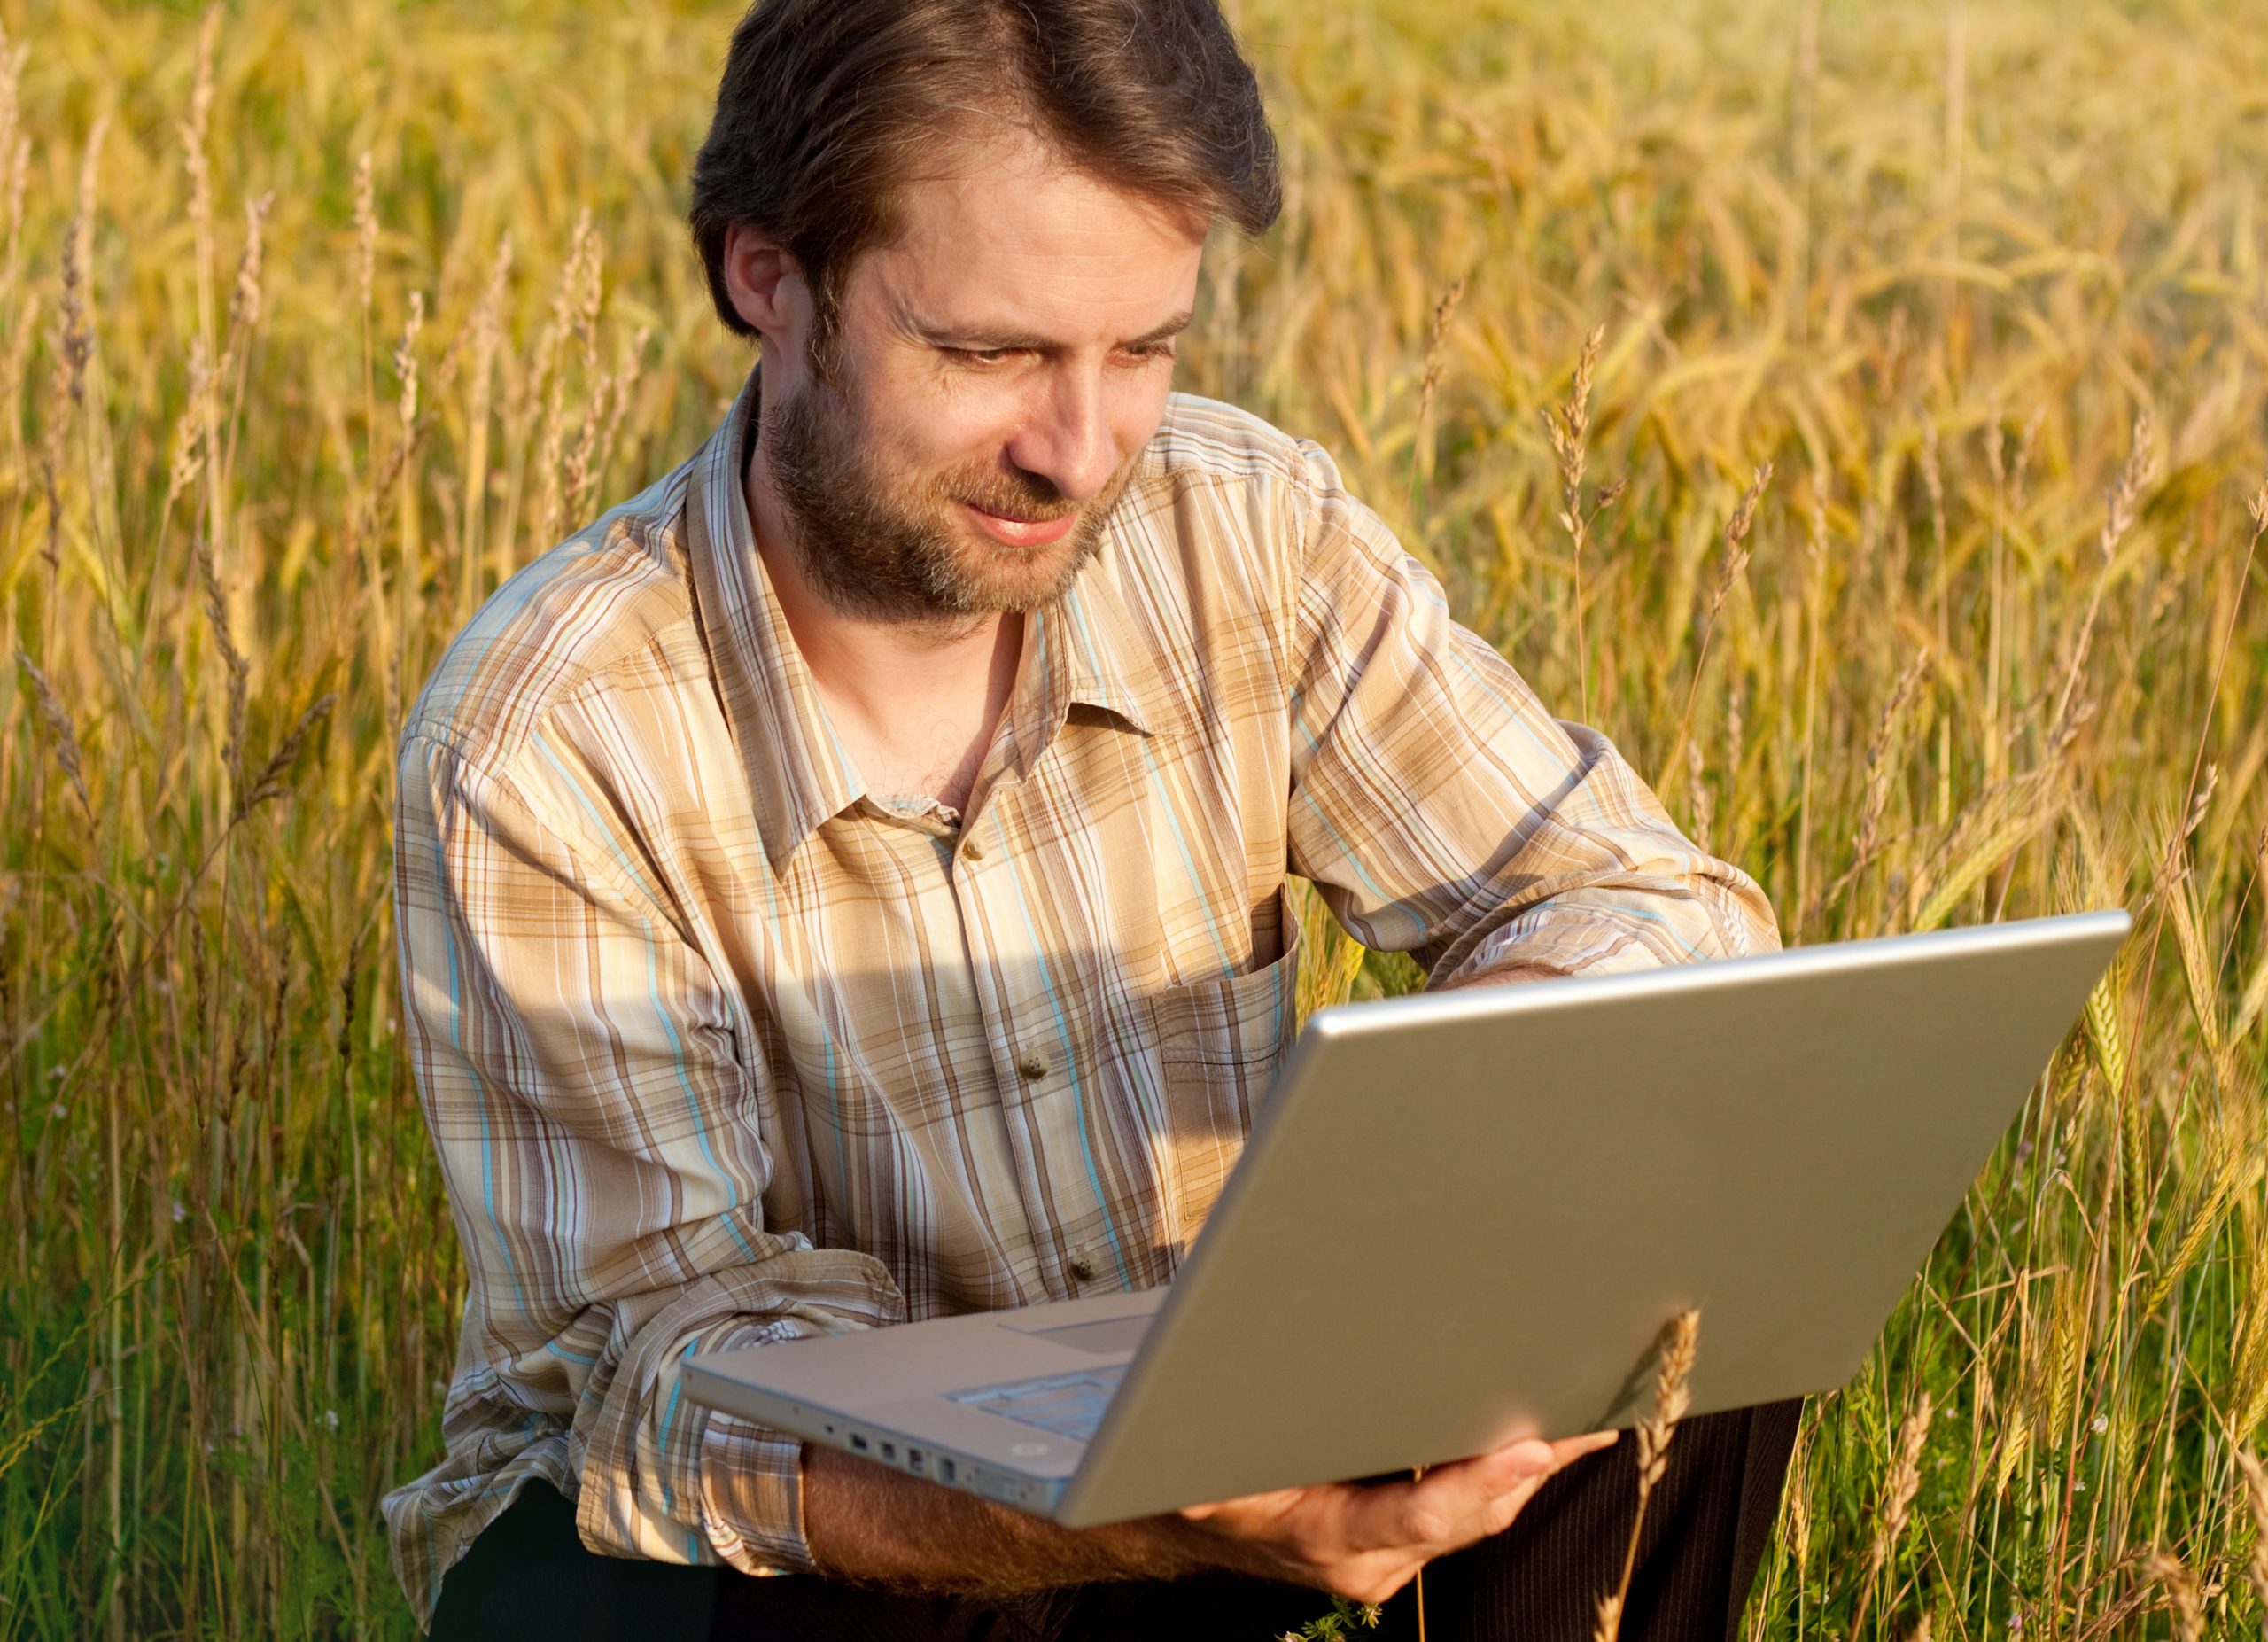 Business update: What's new in the feed industry? Photo: Shutterstock